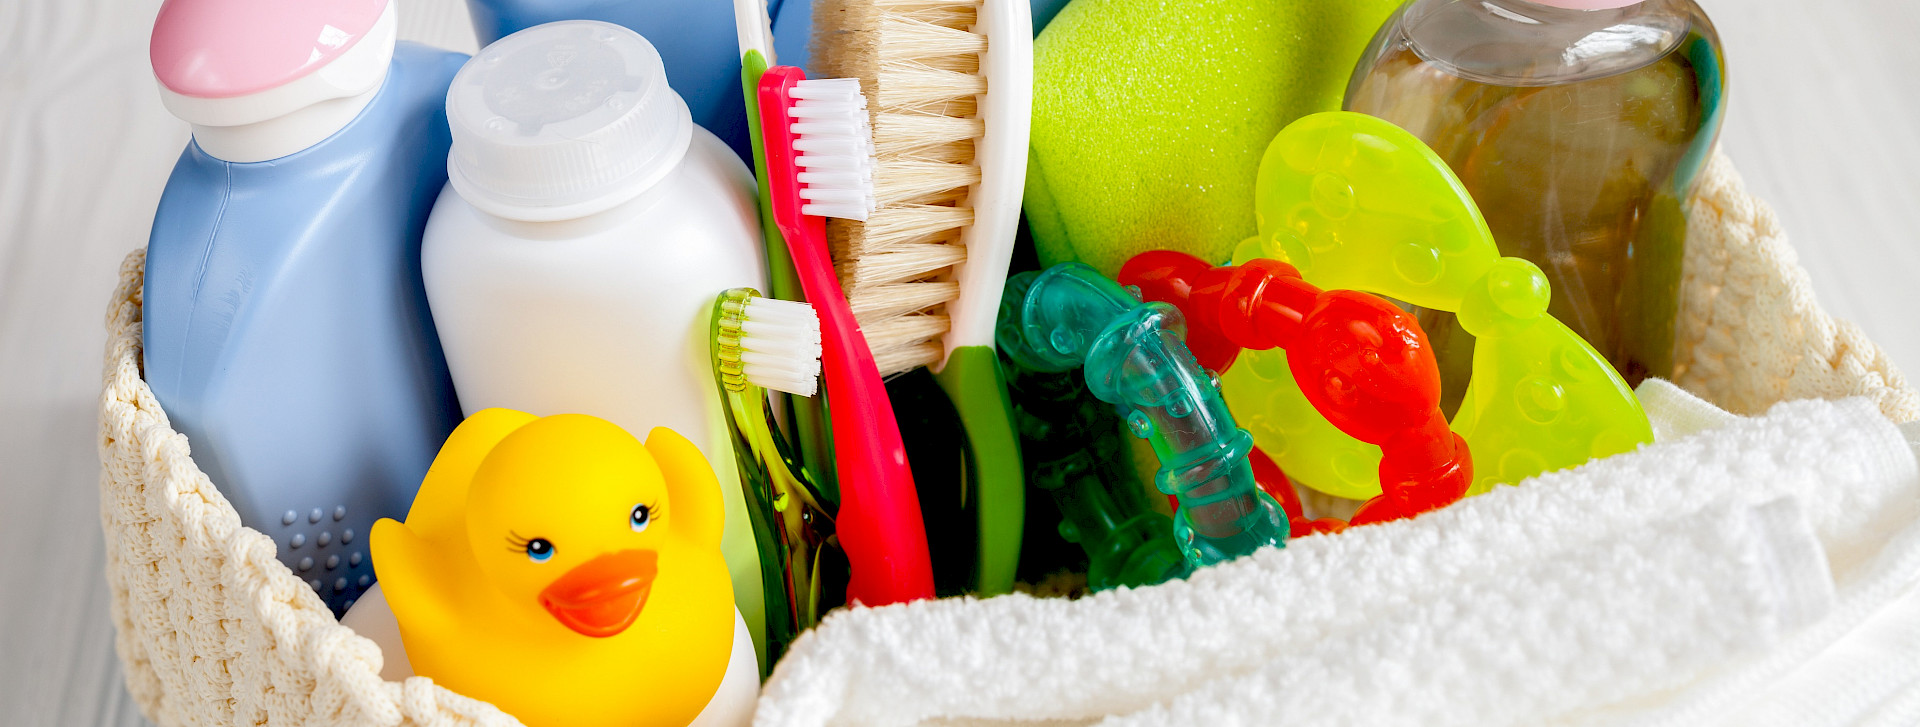 Various commodities in a basket (shampoo, toothbrush, toys)